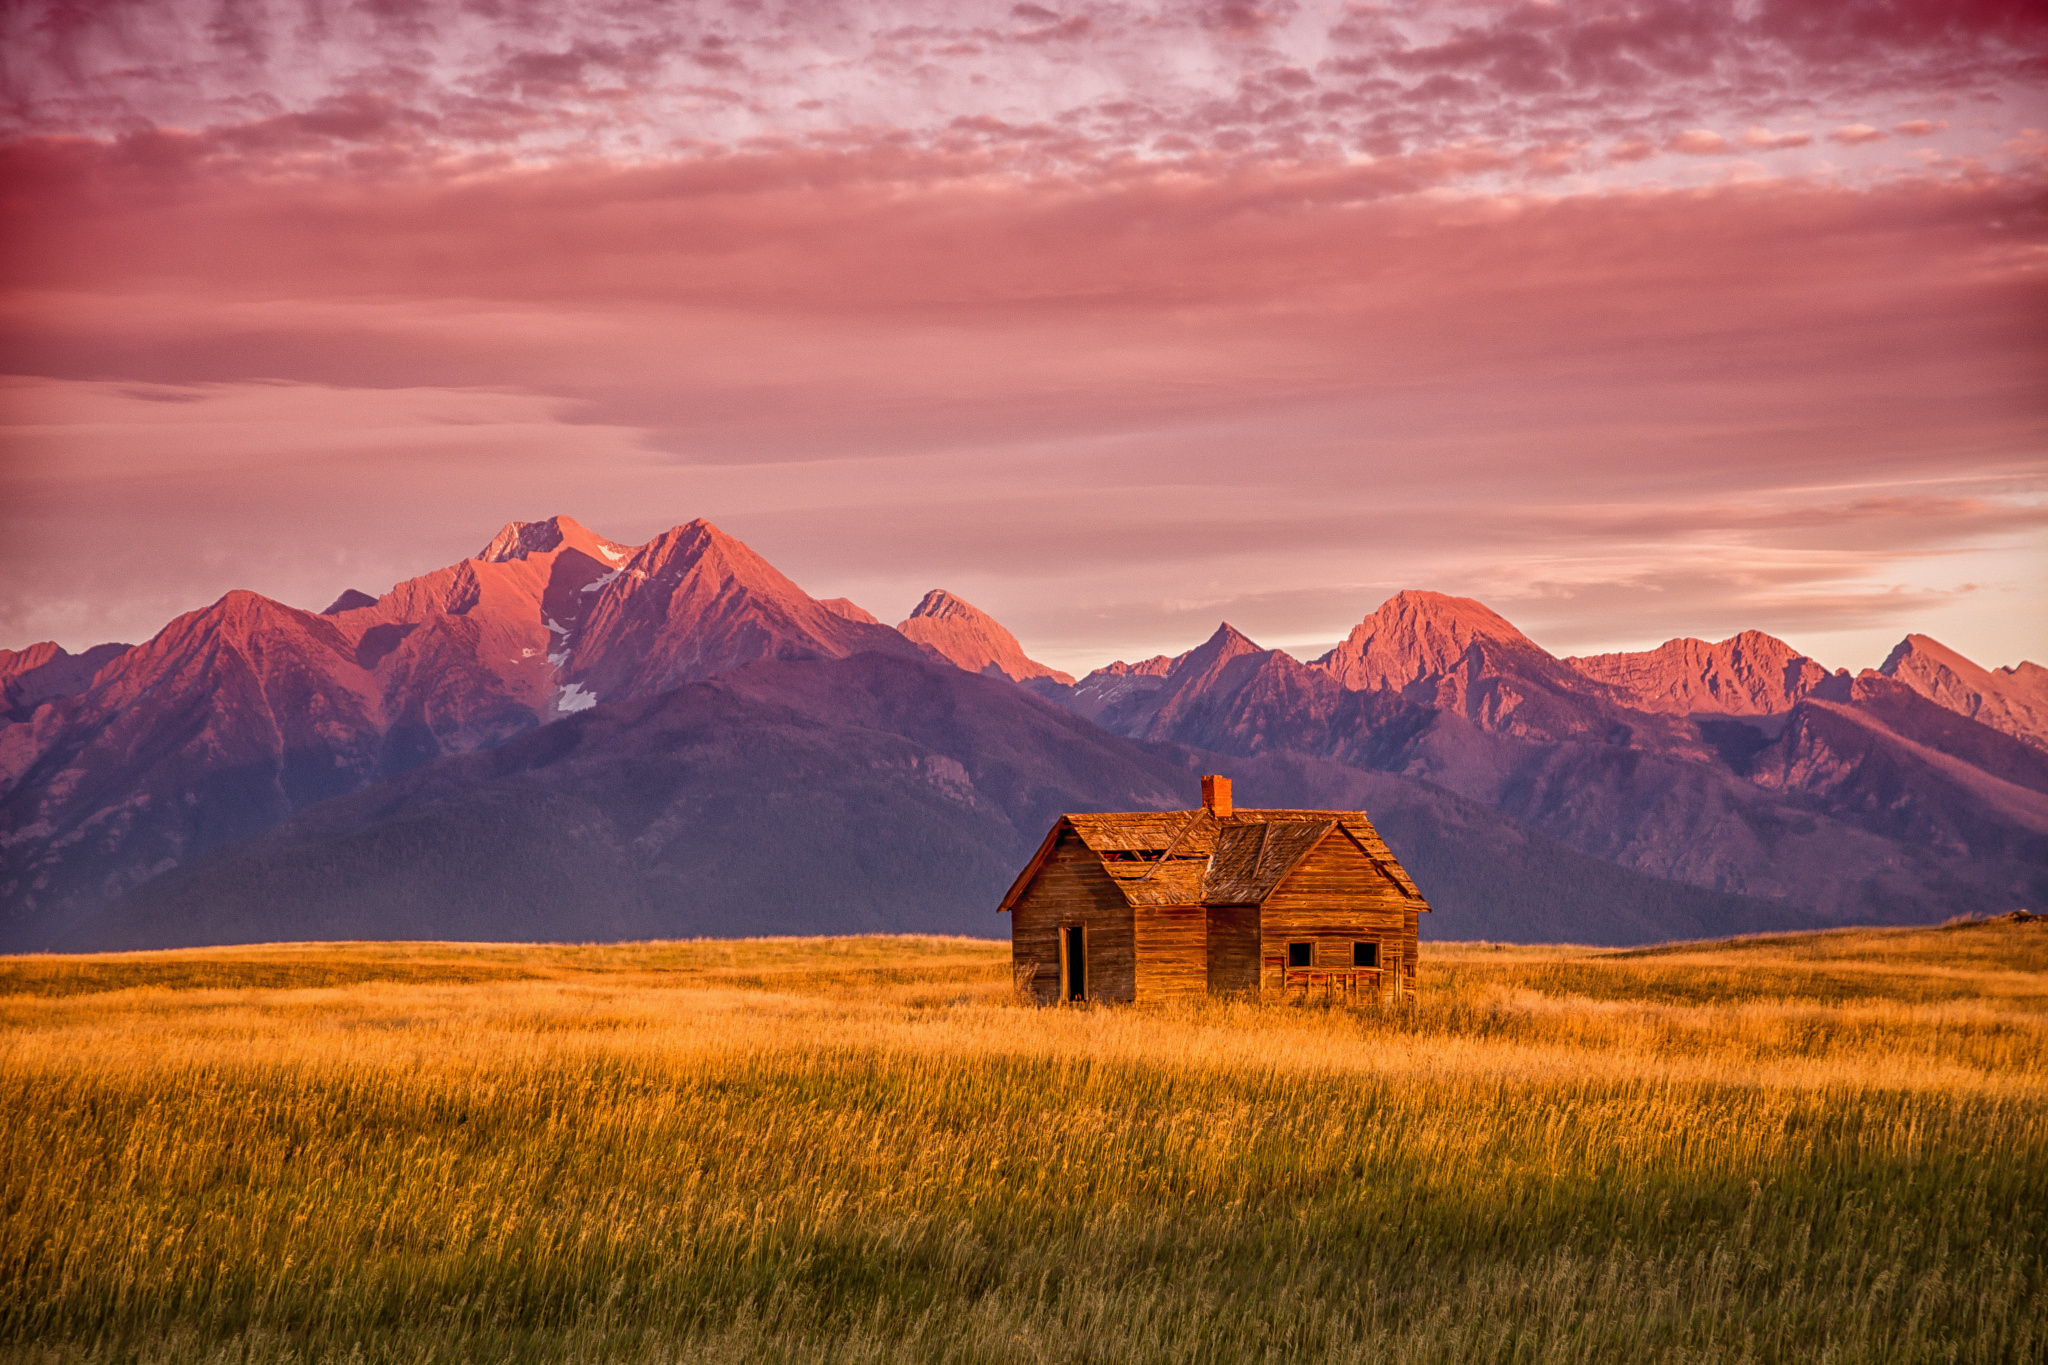 General 2048x1365 USA Montana mountains grass abandoned house sky sunrise cabin log cabin landscape nature clouds